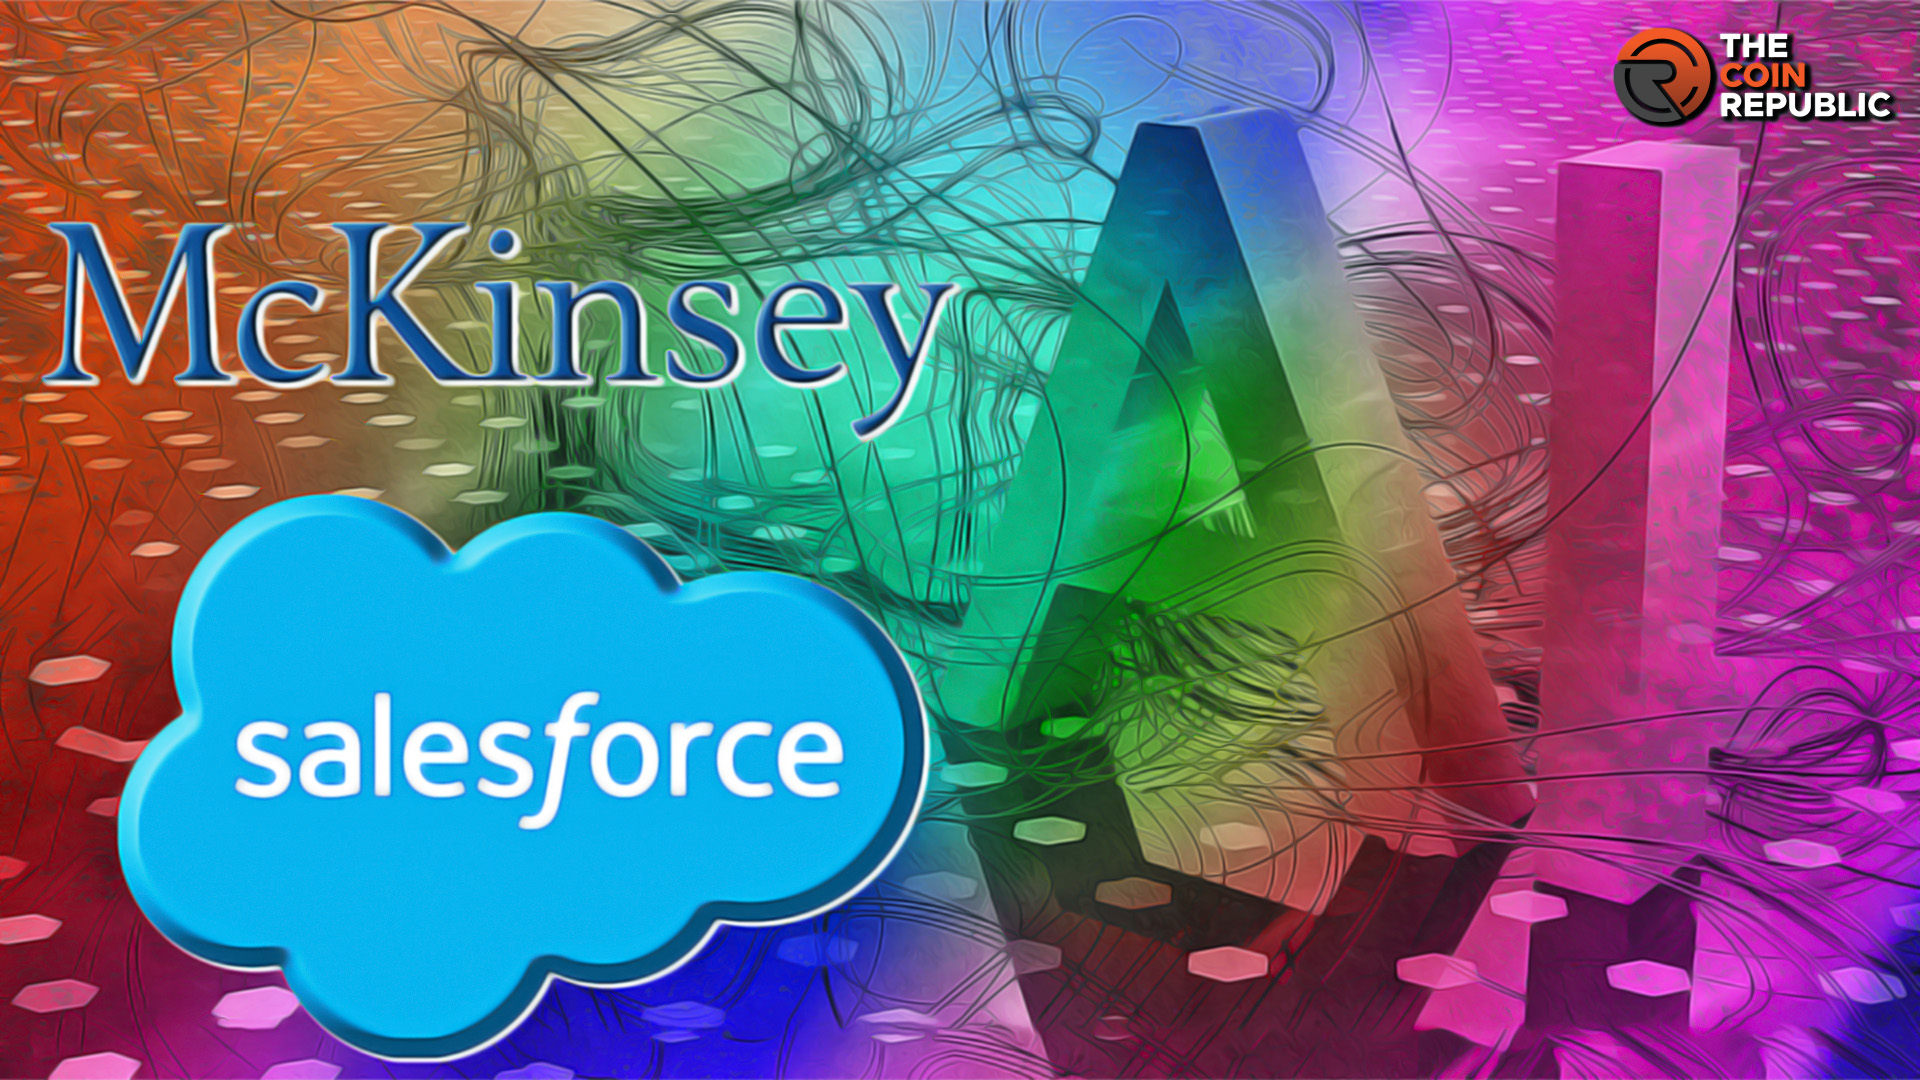 McKinsey and Salesforce Come Together with AI Adoption Plans